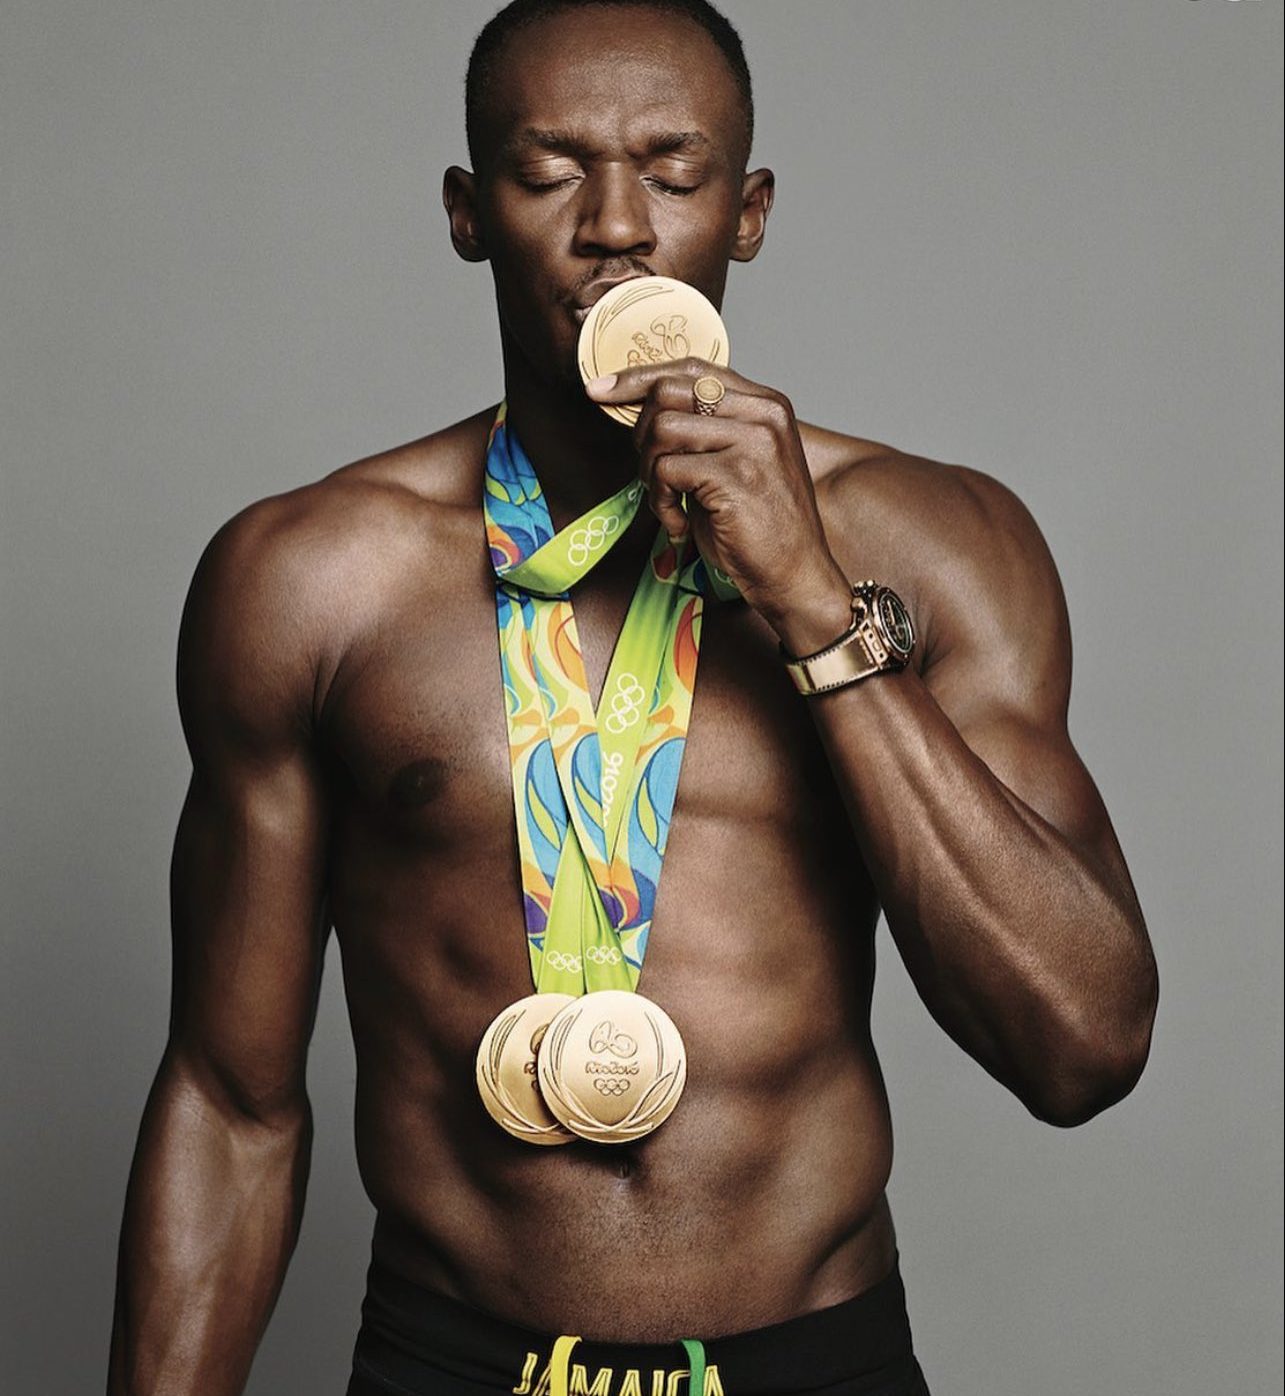 Usain Bolt with Olympics medals.